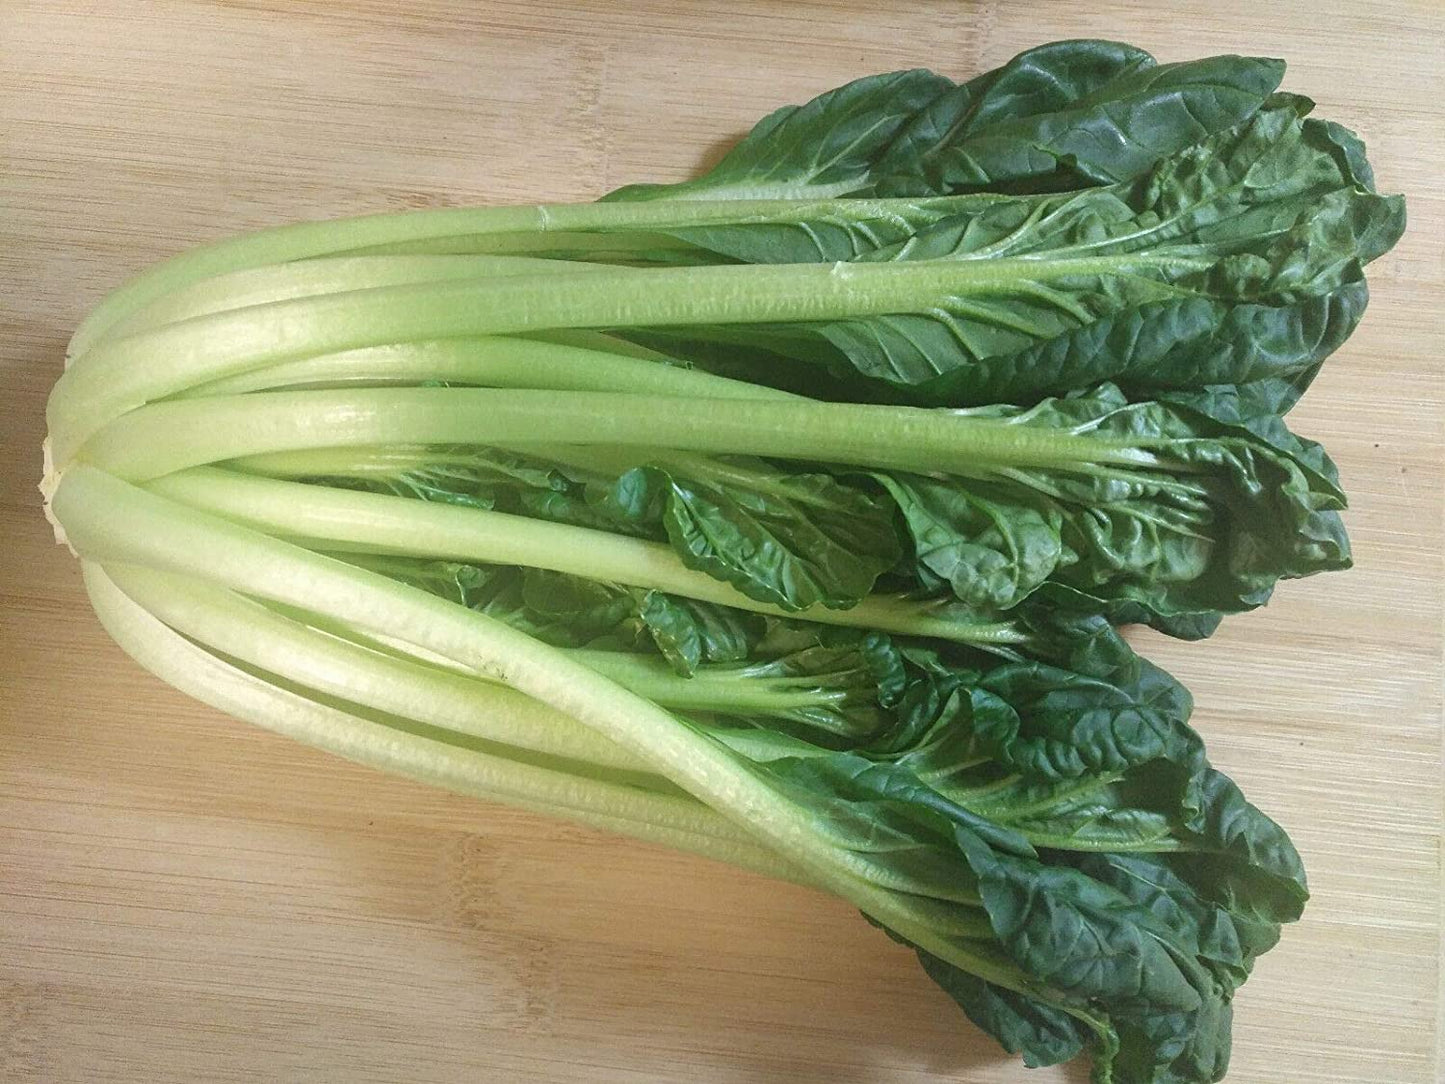 Hundredfold Tatsoi Chinese Cabbage 500 Vegetable Seeds - Brassica rapa, Pakchoi Pak Choi Heirloom Non-GMO Rosette Bok Choy, or Spinach Mustard for Home Garden Yard Balcony & Indoor Planting